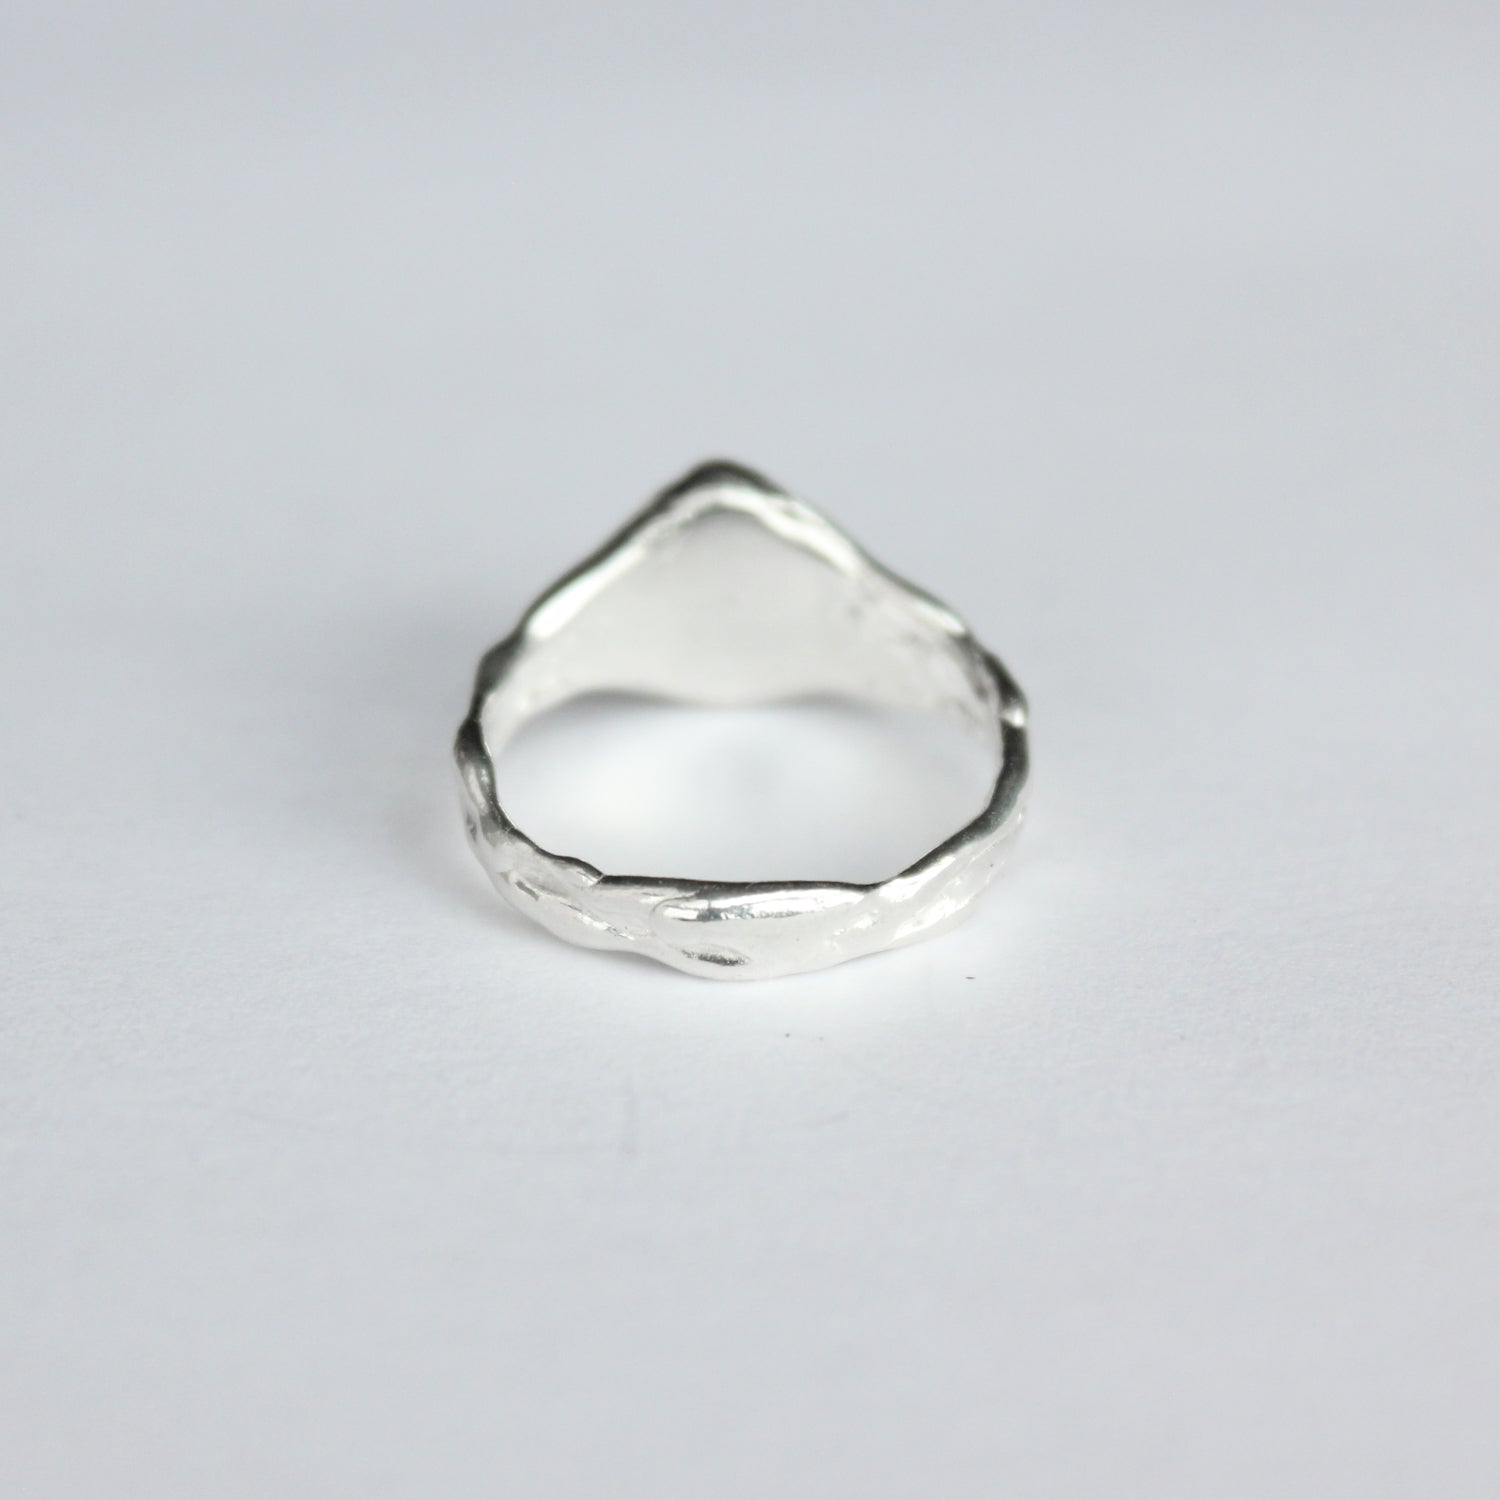 Squiggly Opal Ring - Size 6.5